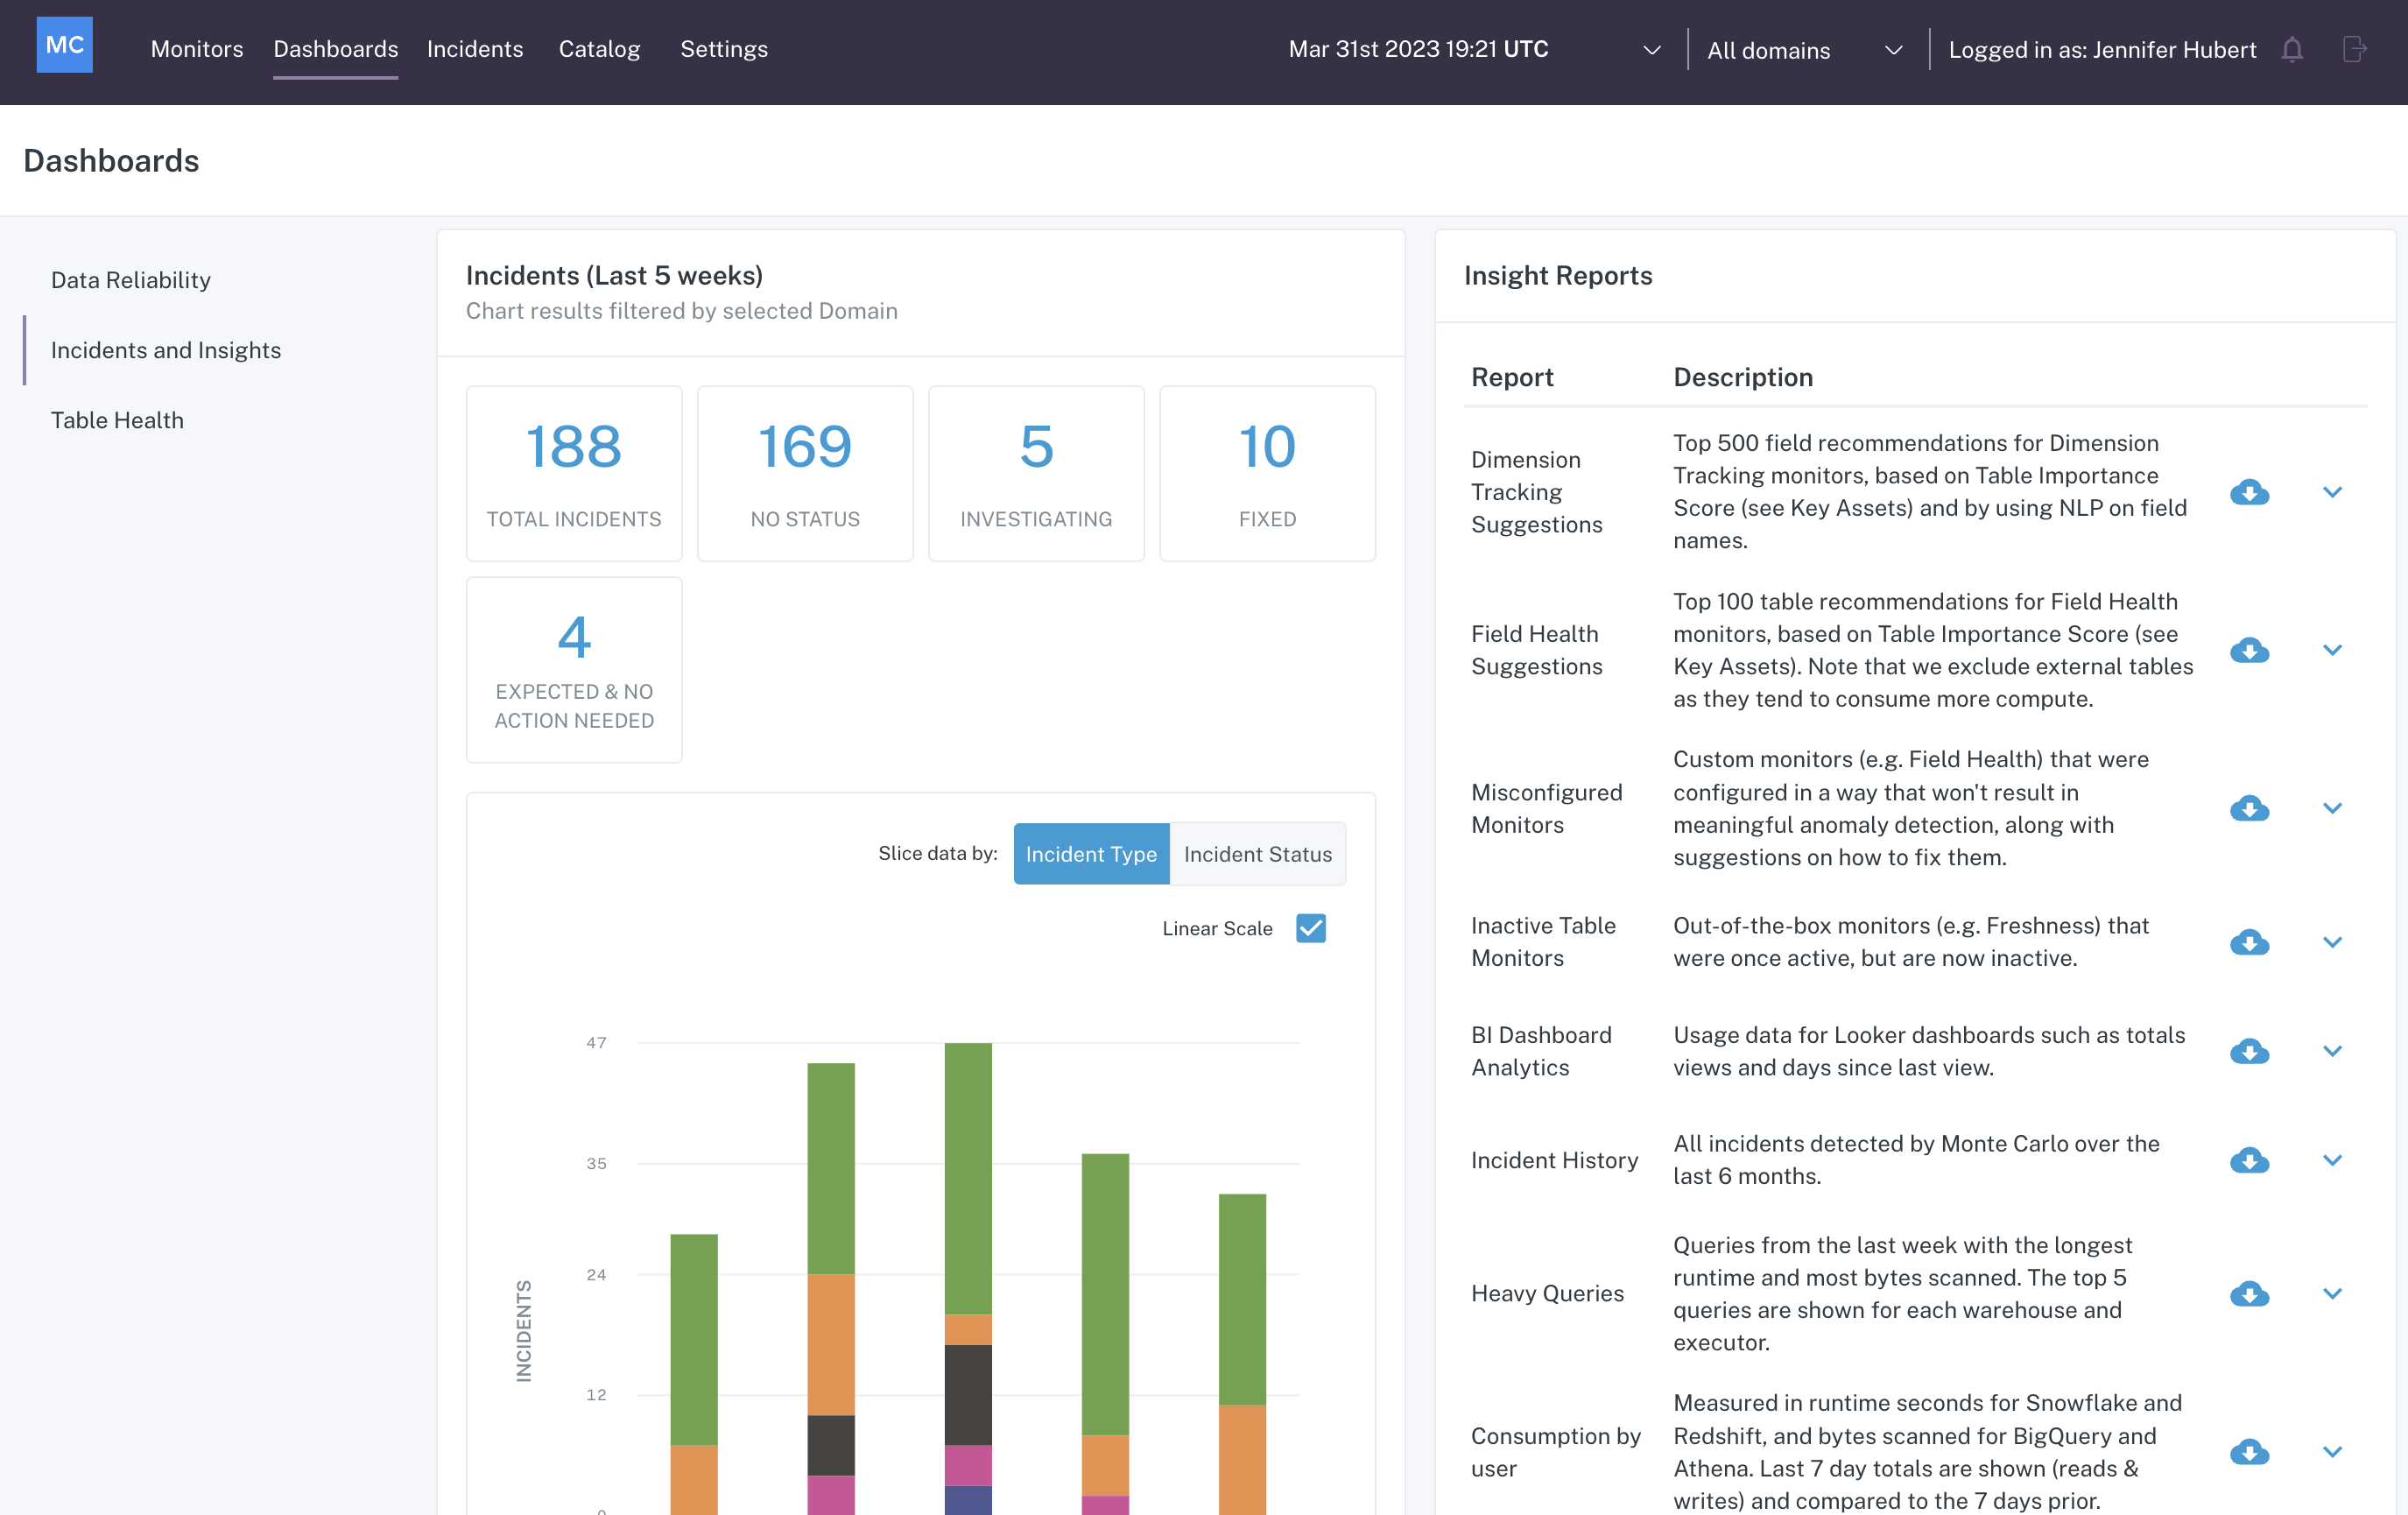 Incidents and Insights section of Dashboards which houses downloadable insights reports